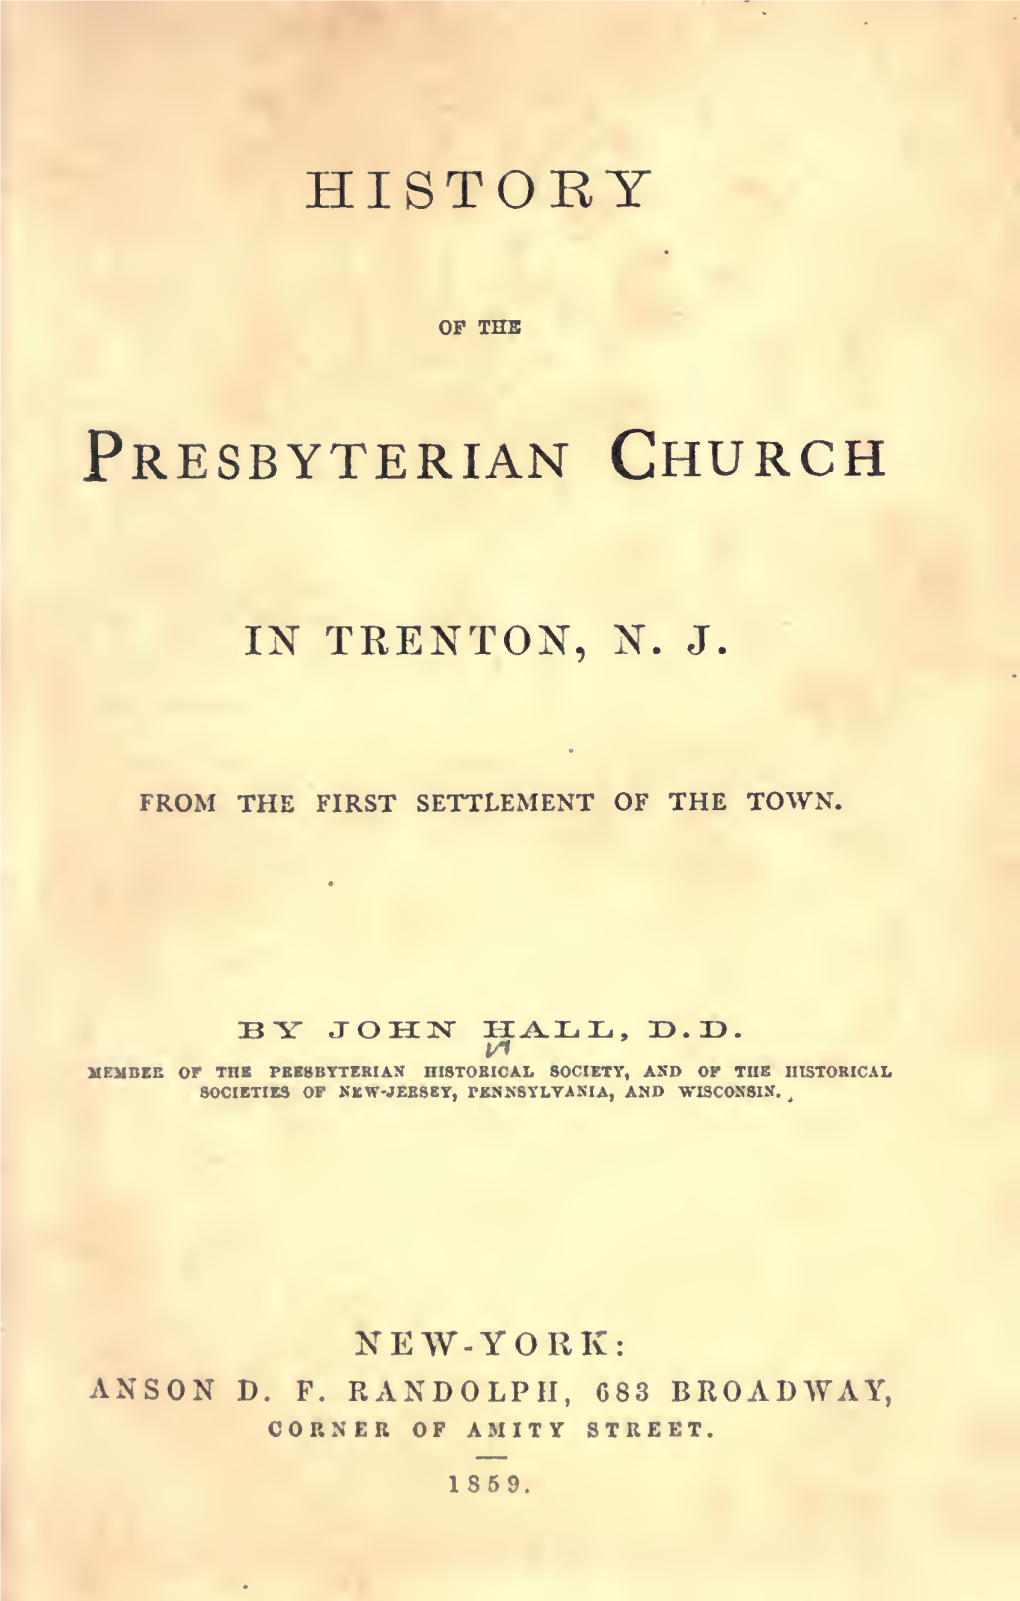 History of the Presbyterian Church in Trenton, N.J., from the First